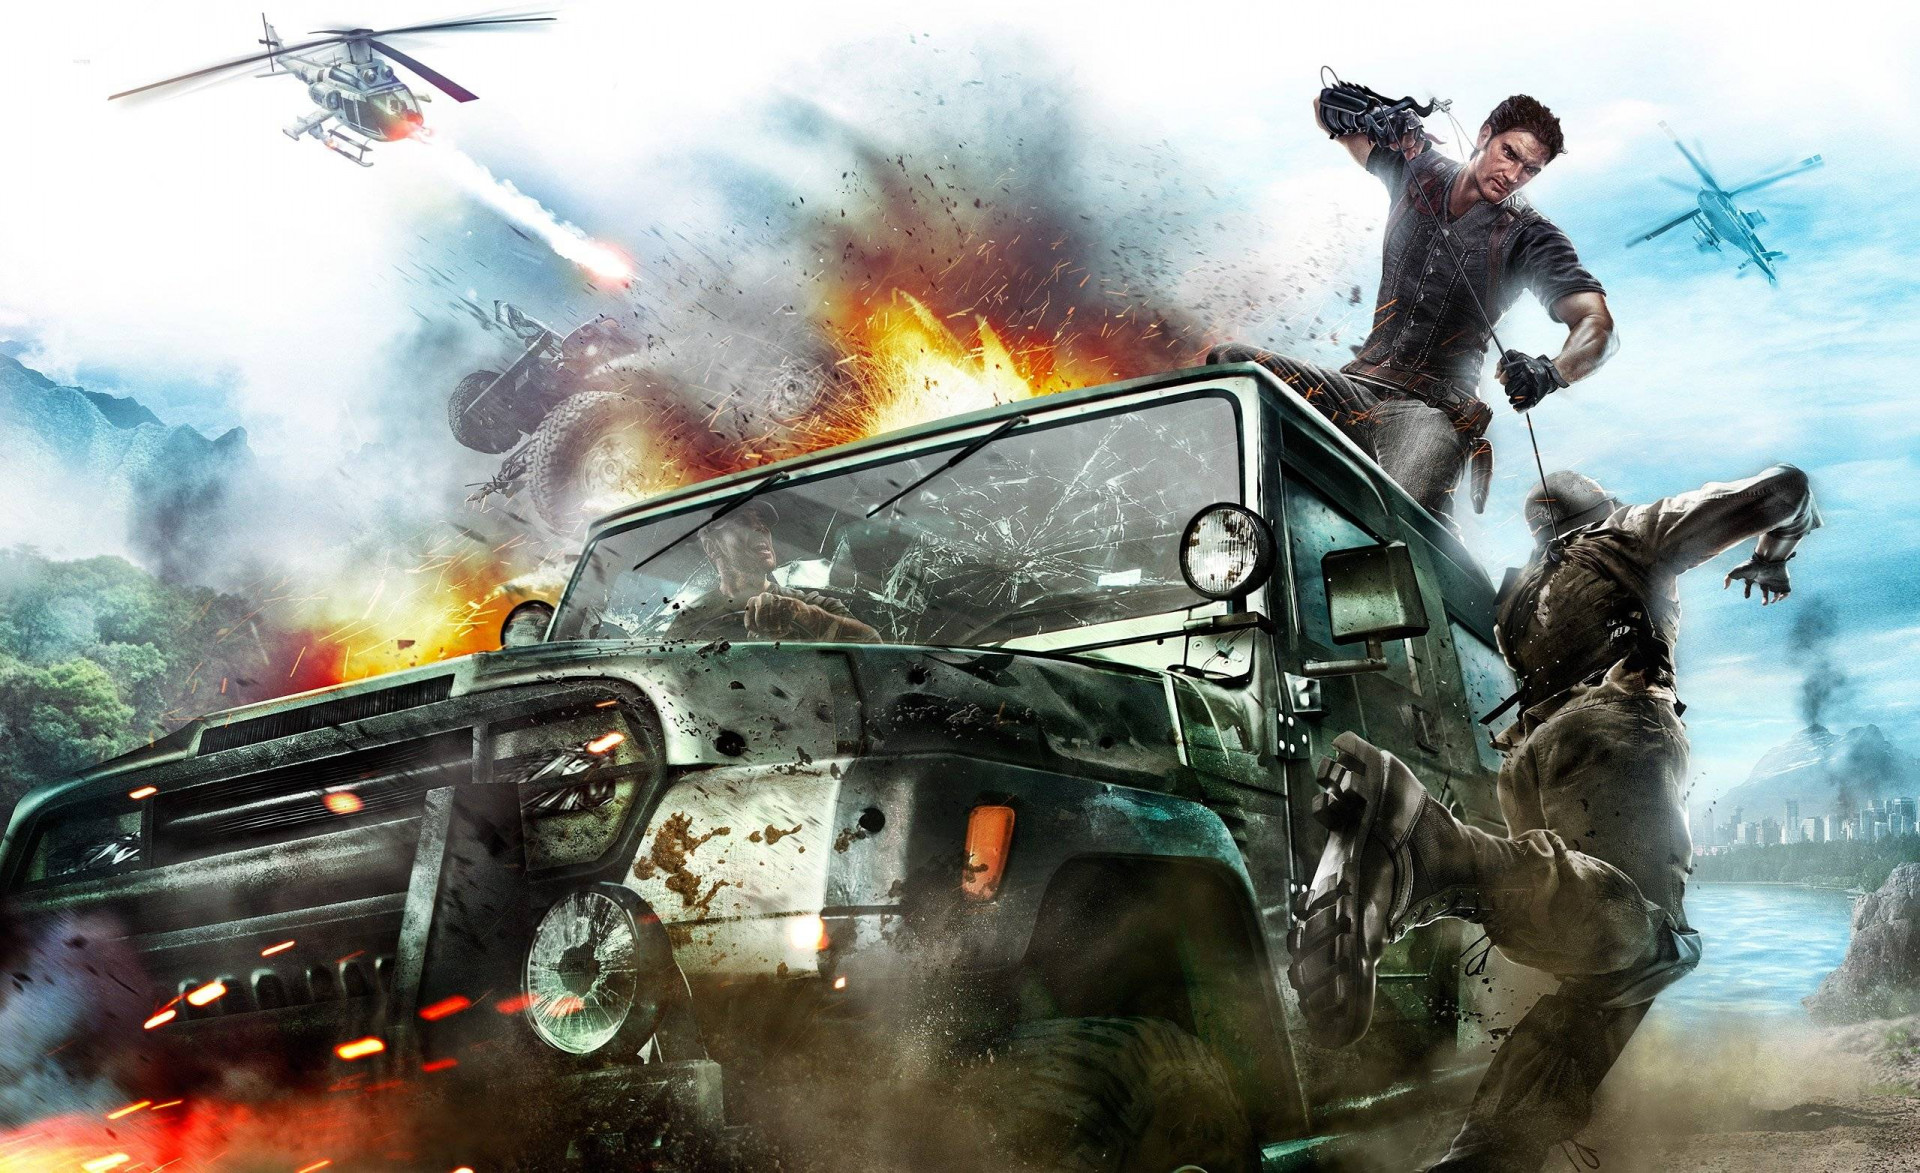 This is just a game. Just cause (игра). Just cause 2 Art. Just cause арт. Just cause арты.